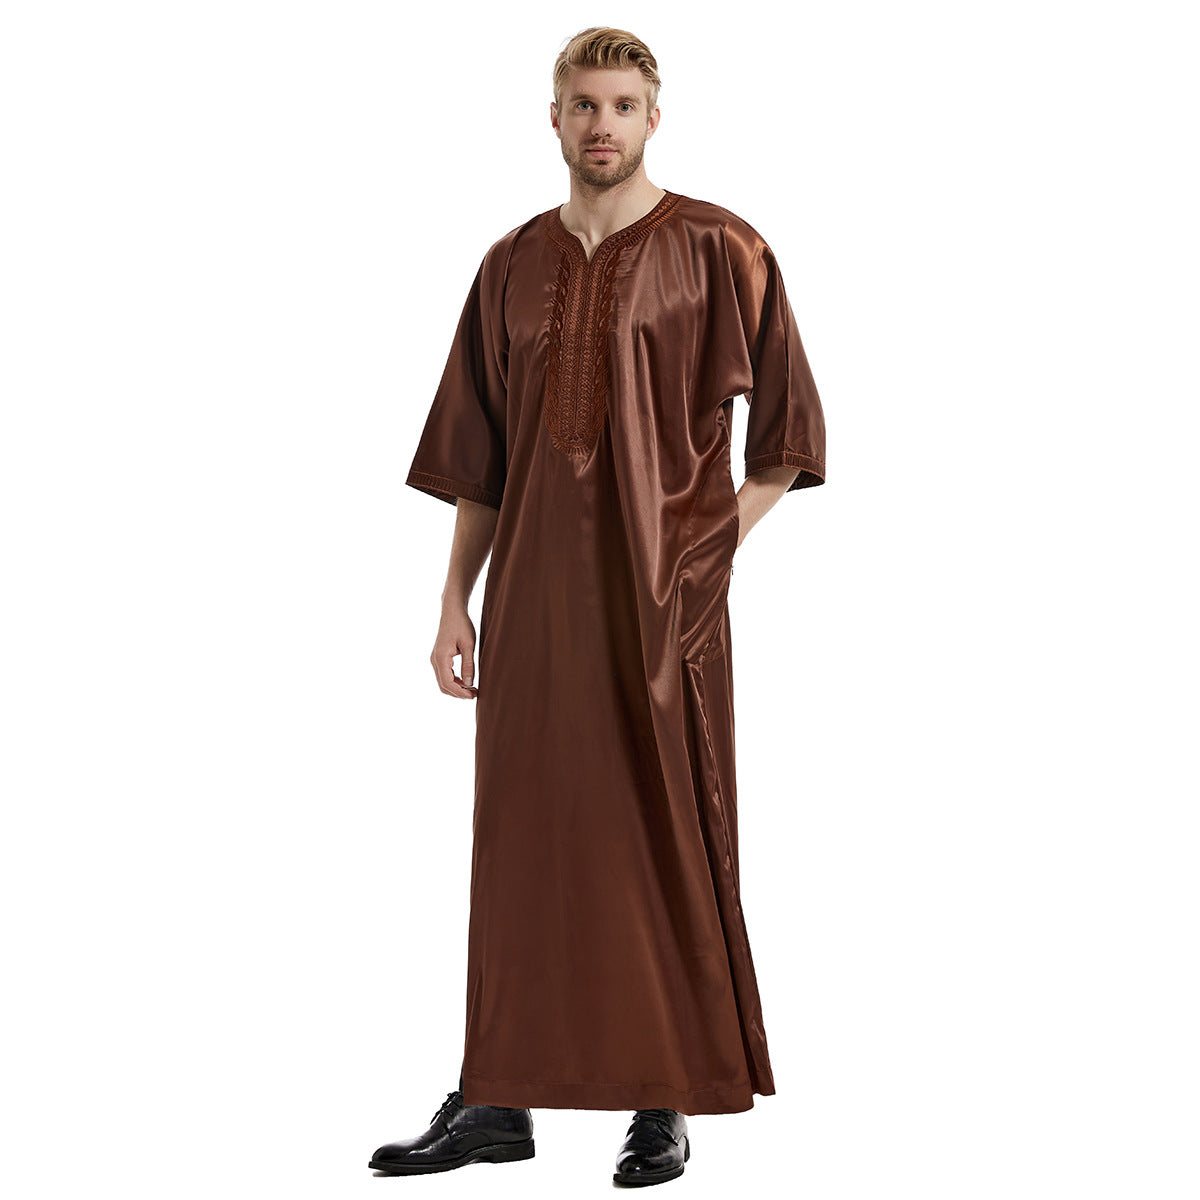 Discover sophistication with our Men's Abaya Half Sleeves in Coffee at Hikmah Boutique. Crafted from premium materials with exquisite embroidery, this abaya offers both style and comfort. Elevate your modest clothing wardrobe with this versatile Islamic attire.